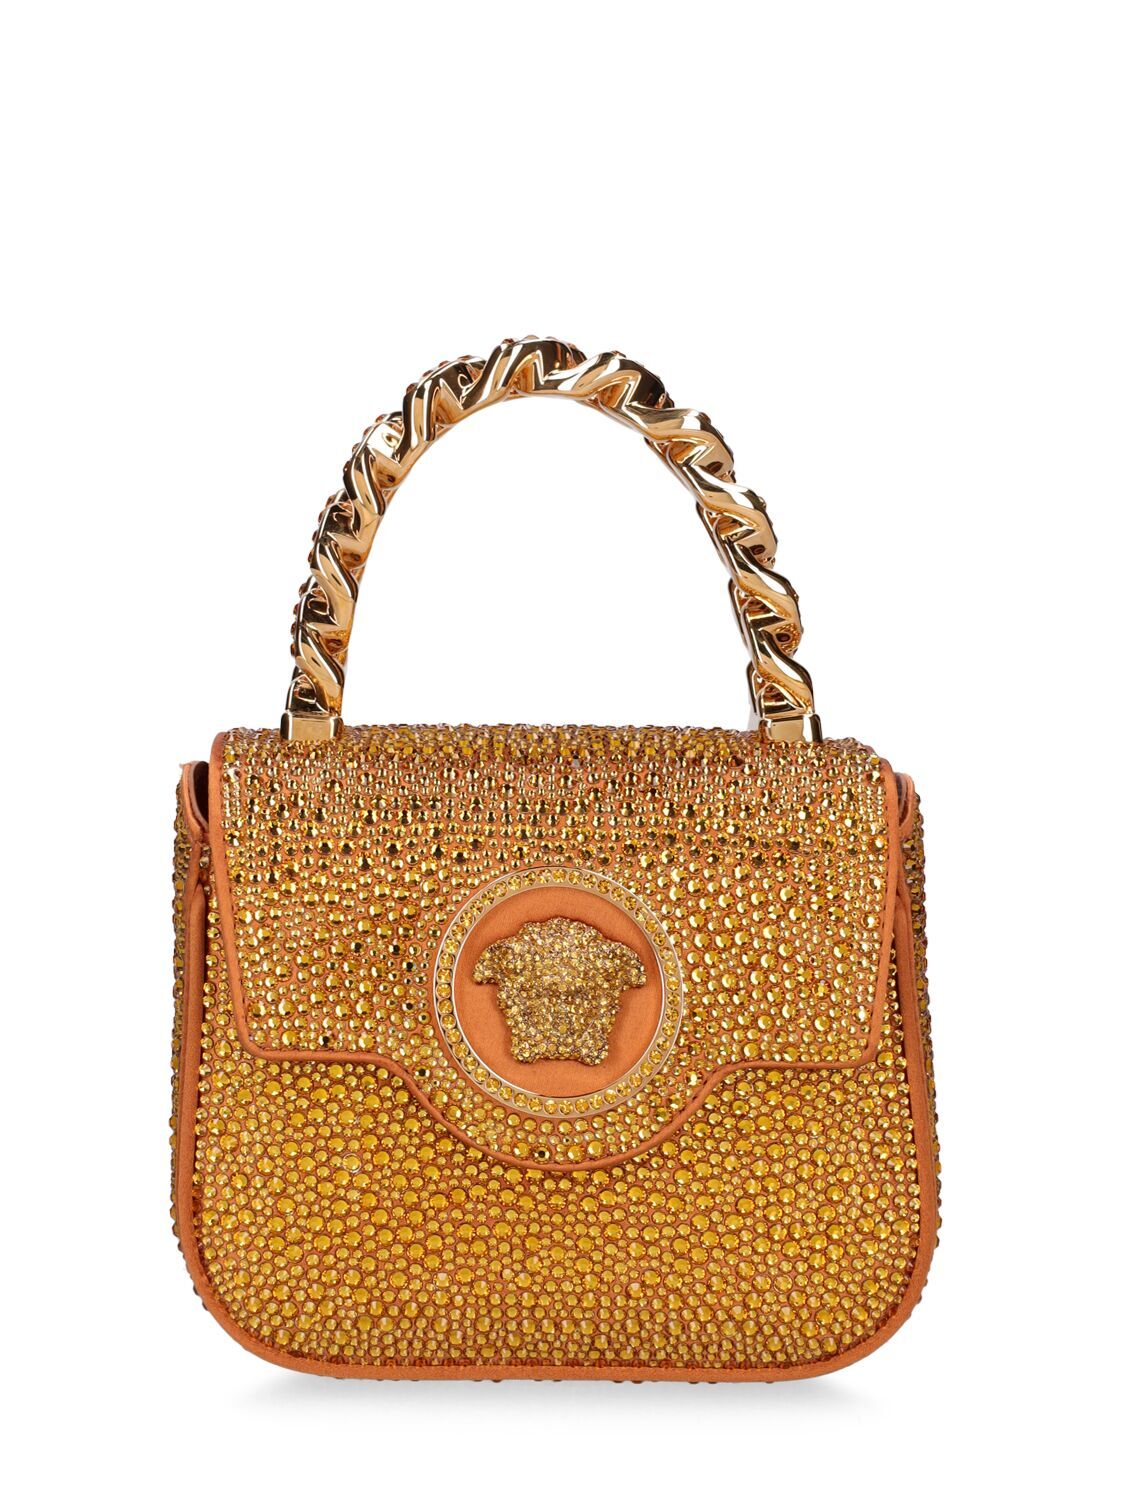 VERSACE Mini Satin & Strass Top Handle Bag in gold